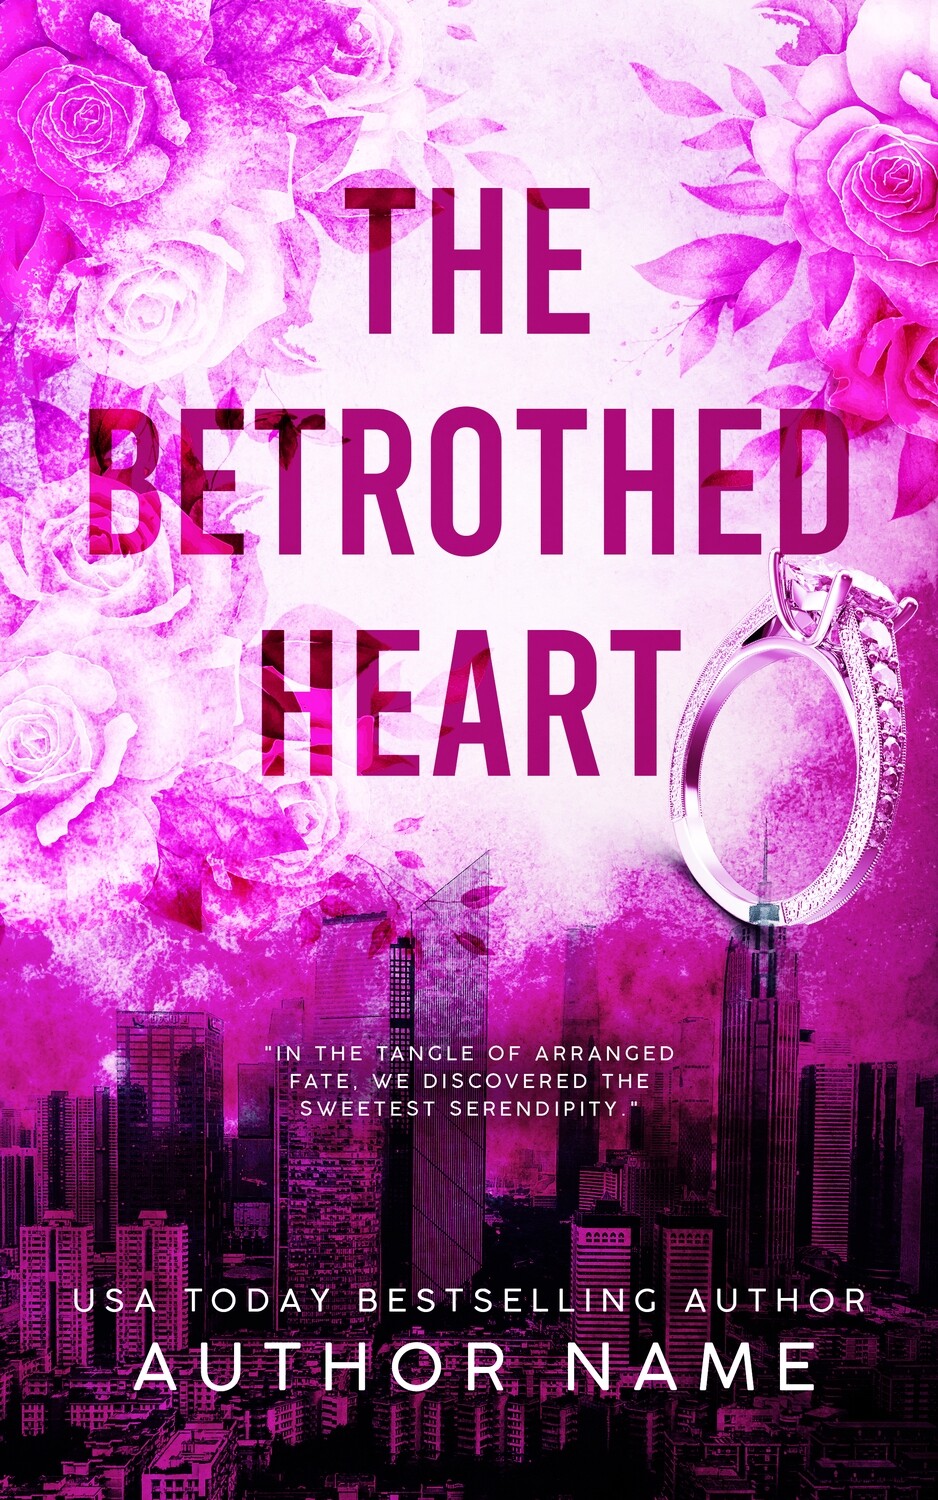 THE BETROTHED HEART